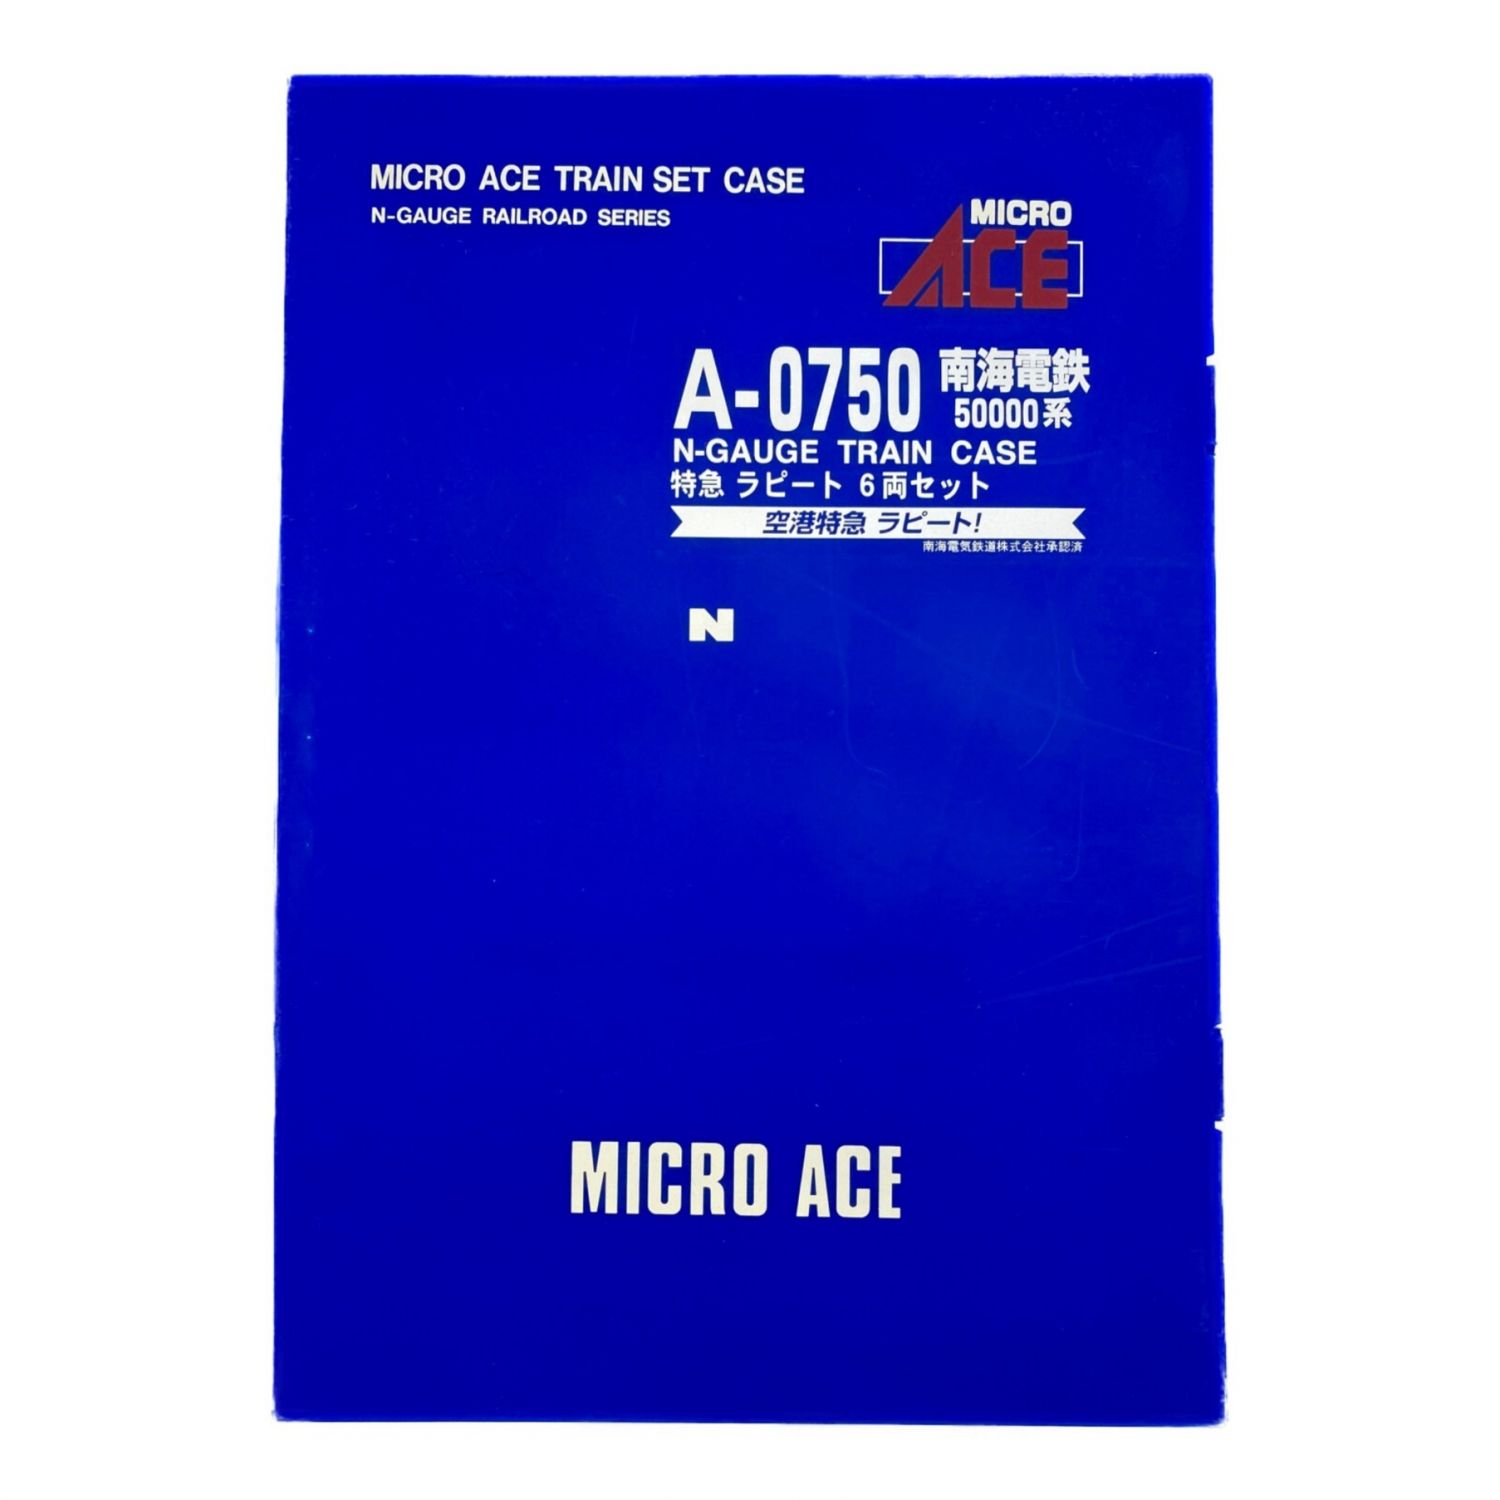 MICRO ACE (マイクロエース) Nゲージ 特急ラピート 6両セット A-0750 ...